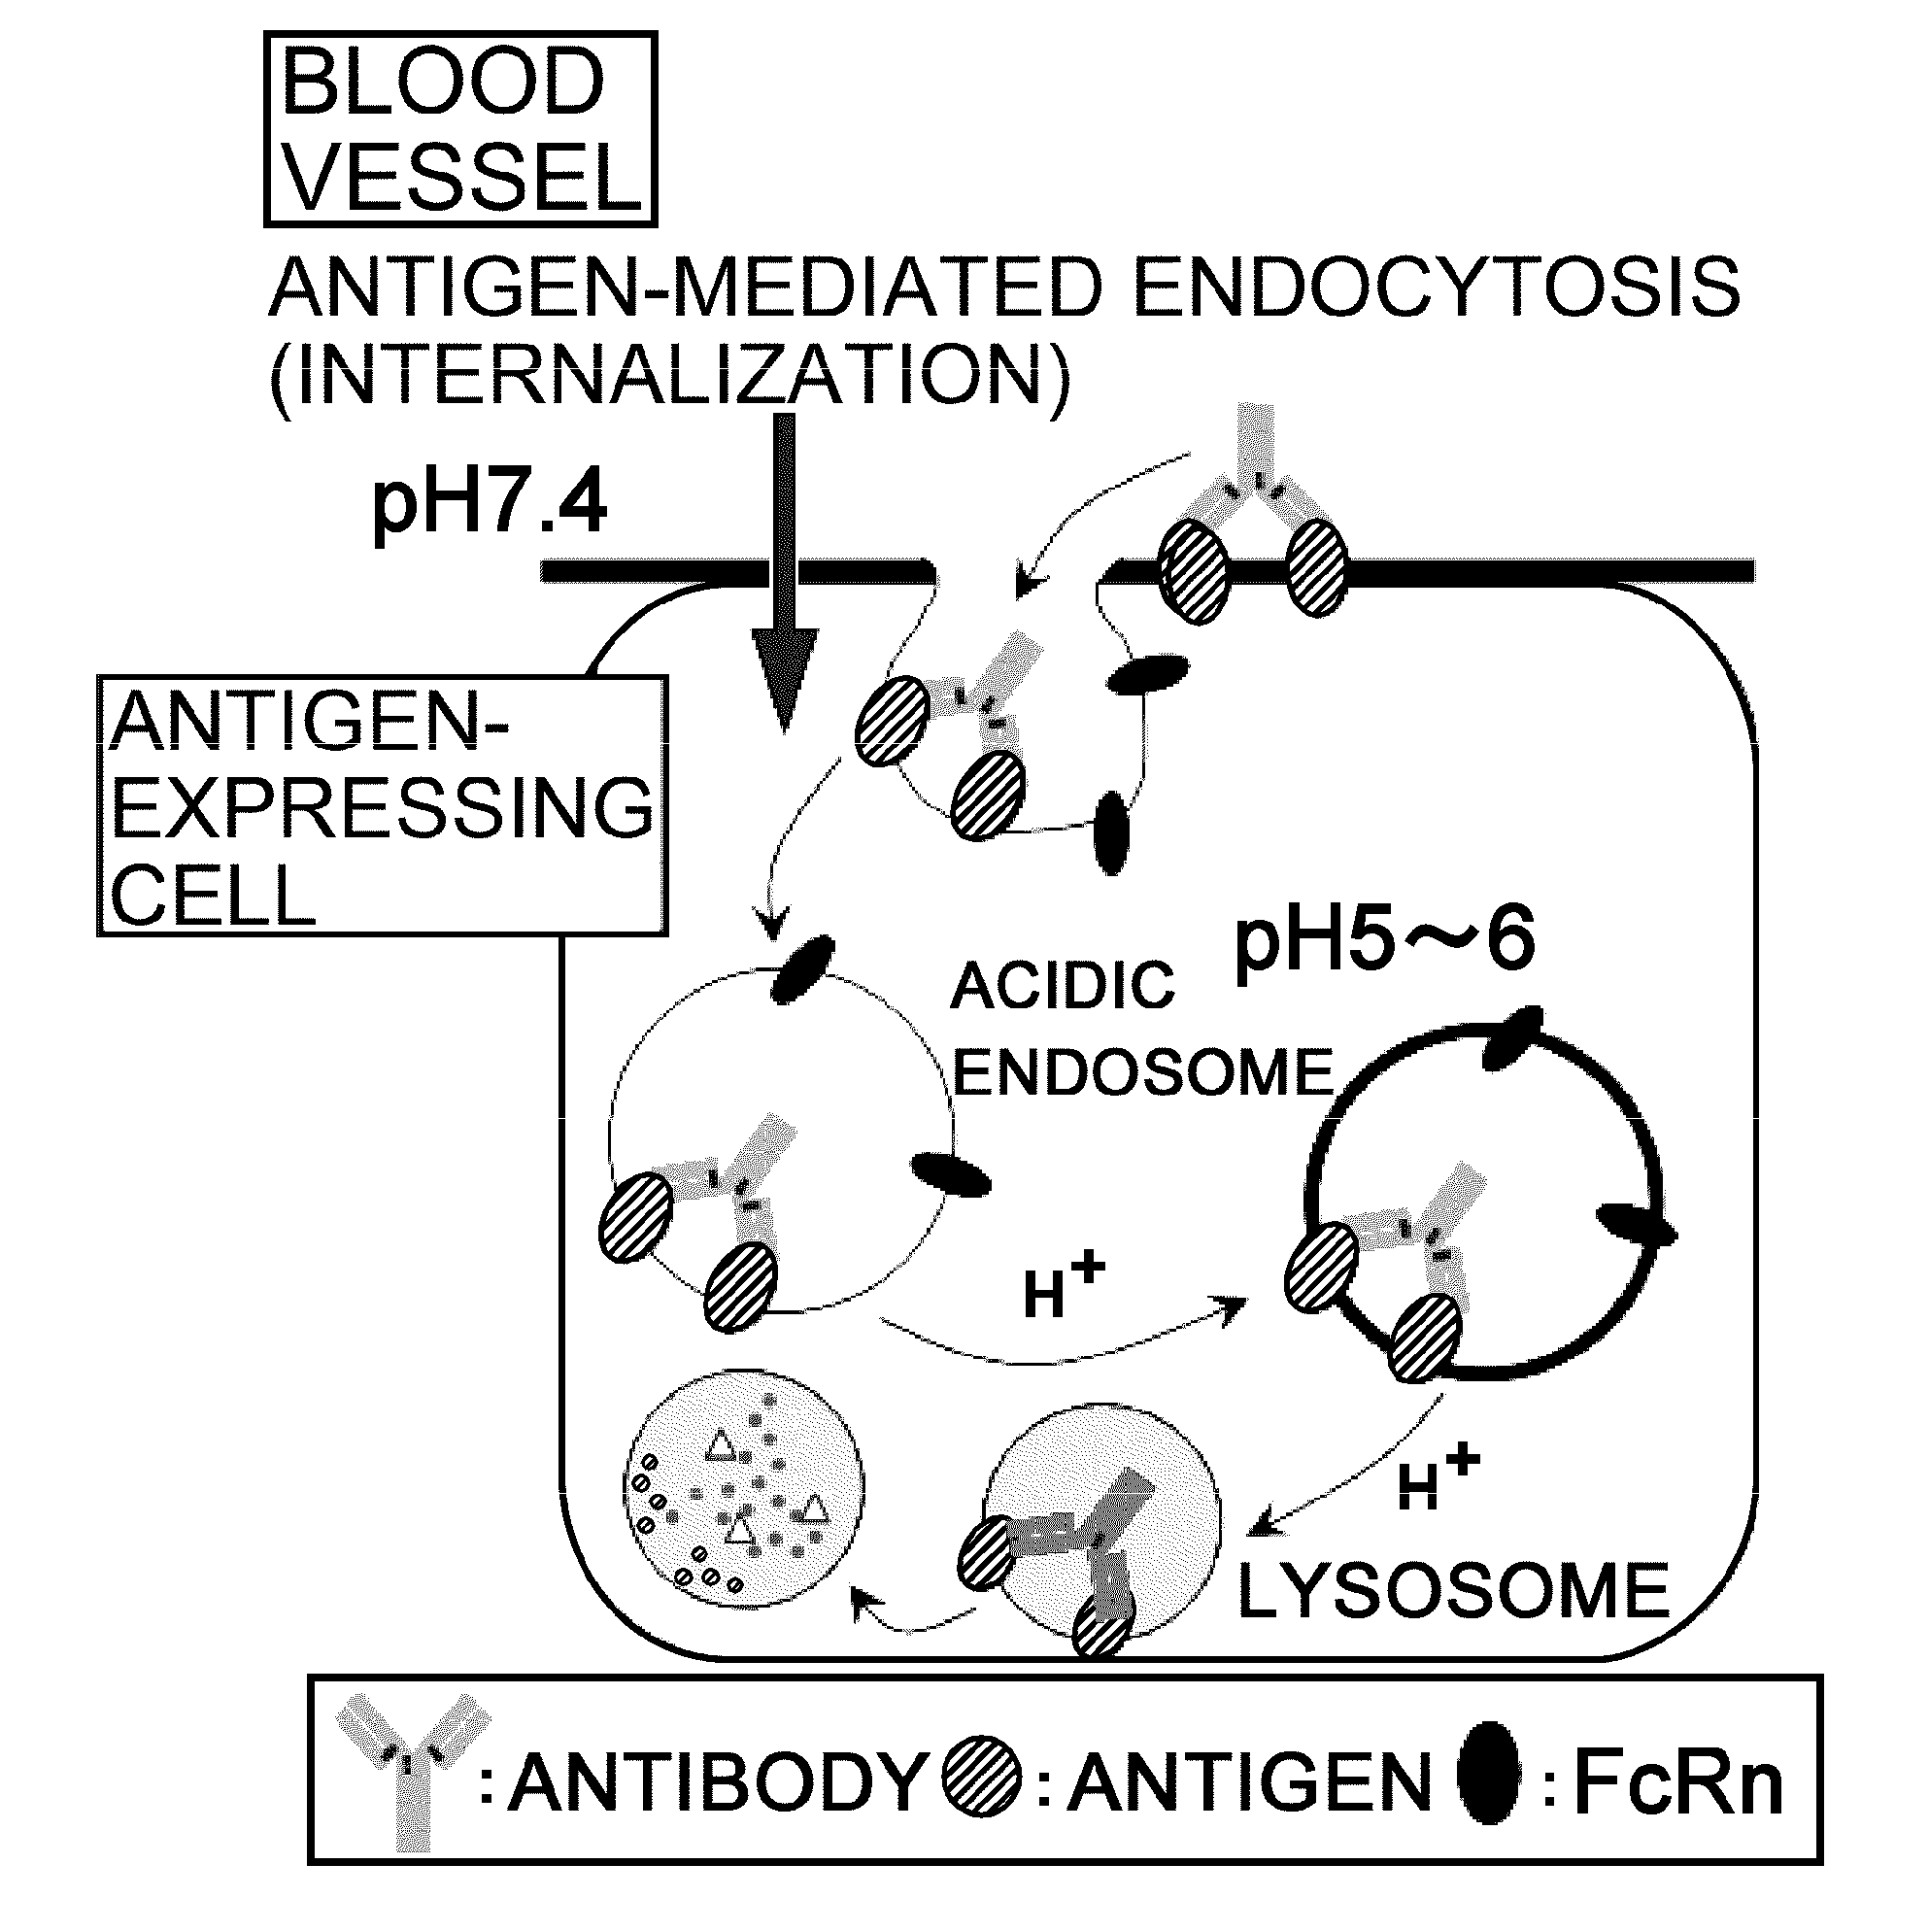 Antigen-binding molecule capable of binding to two or more antigen molecules repeatedly